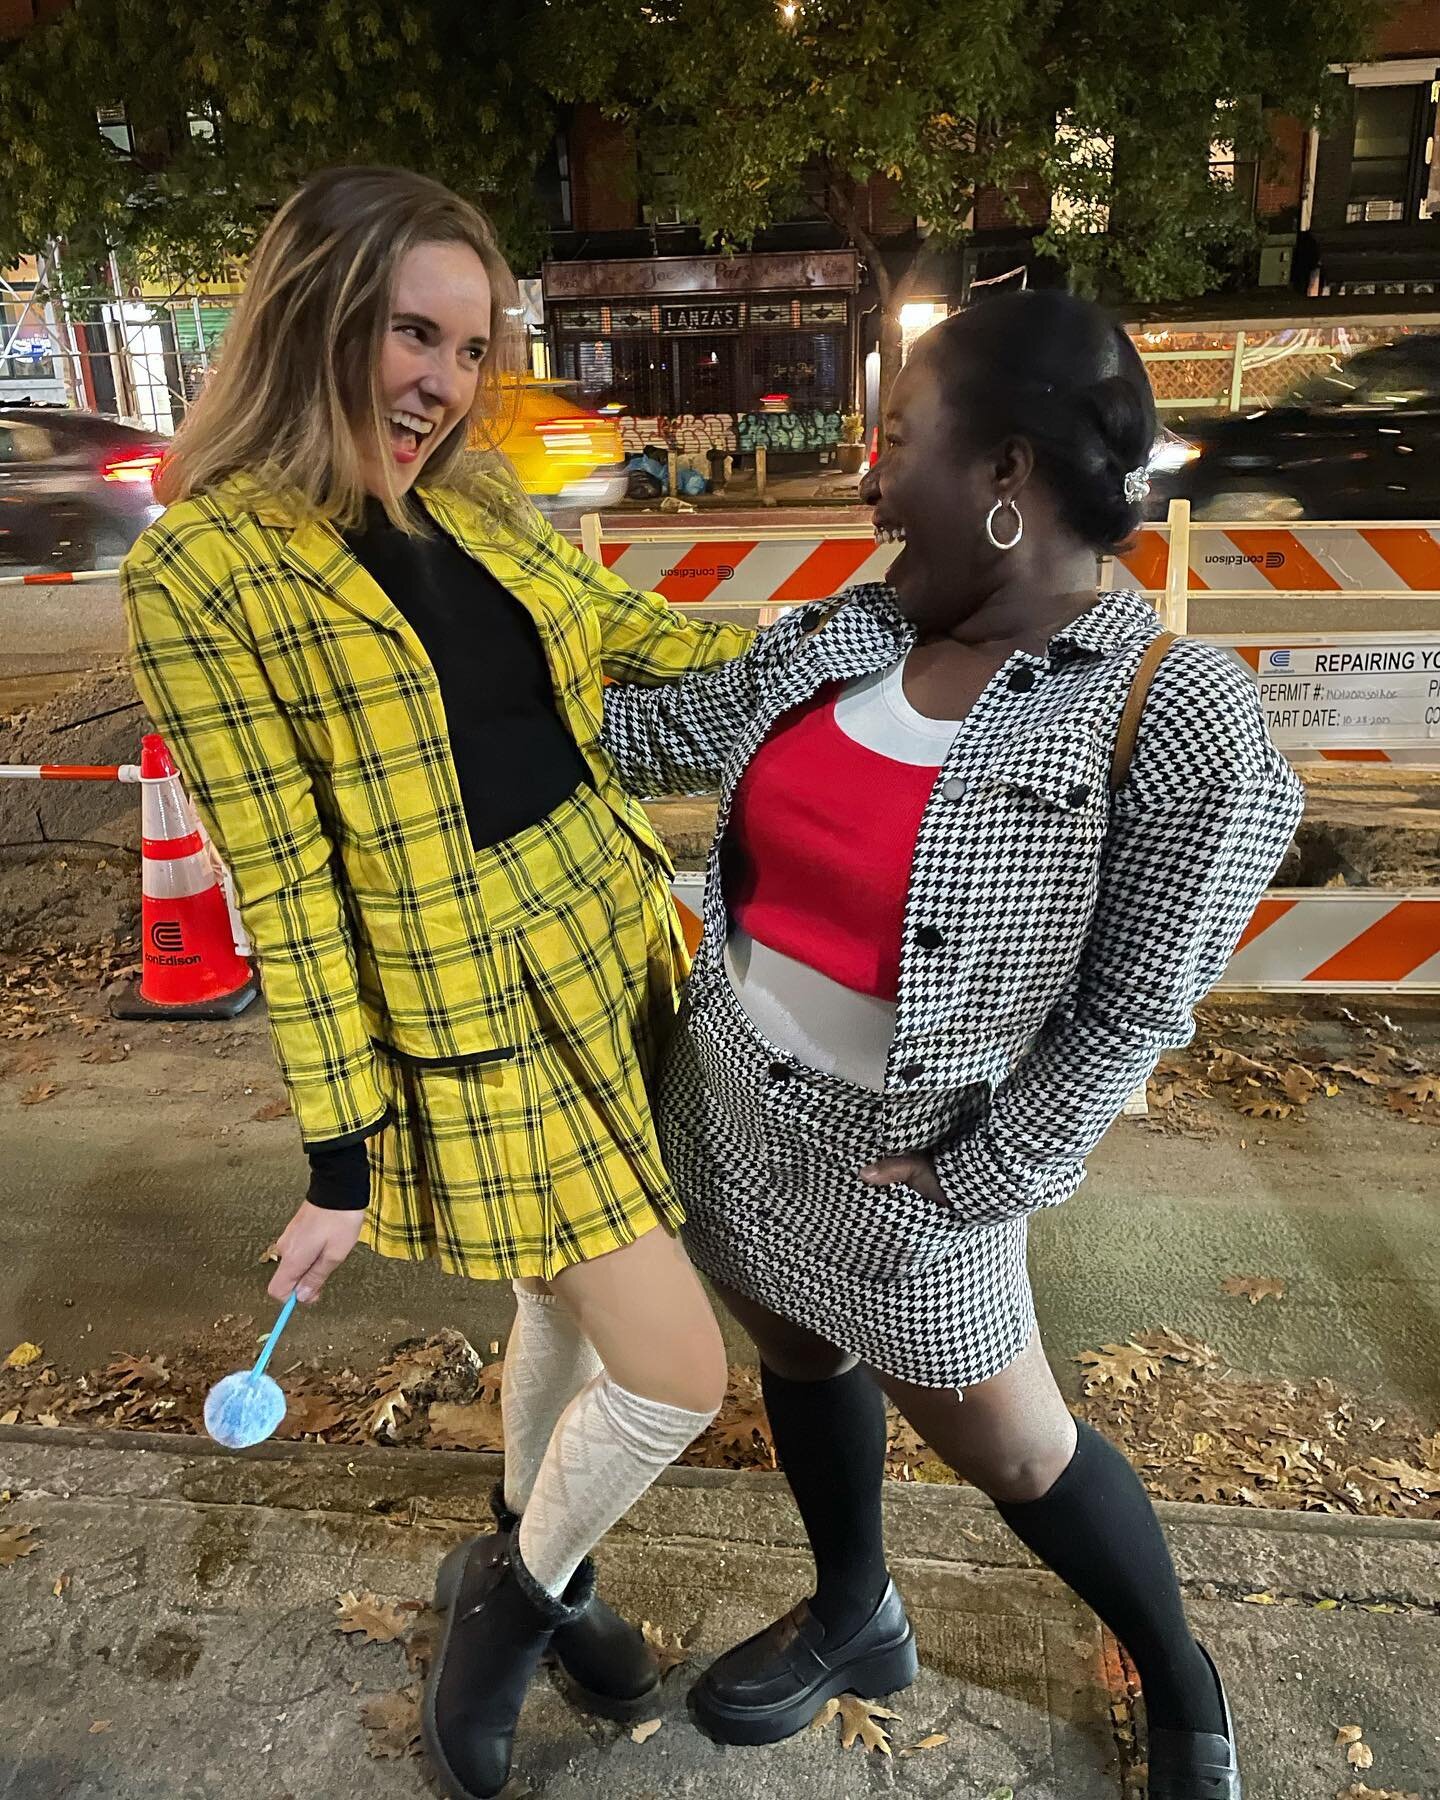 &ldquo;UGH!! As IF!&rdquo;
The Halloween costume we&rsquo;ve been waiting actual years for! 💜@jada_bee16 I love my bestie for the restie 😙
#Cher #Dionne #Clueless #Halloween #90sKids